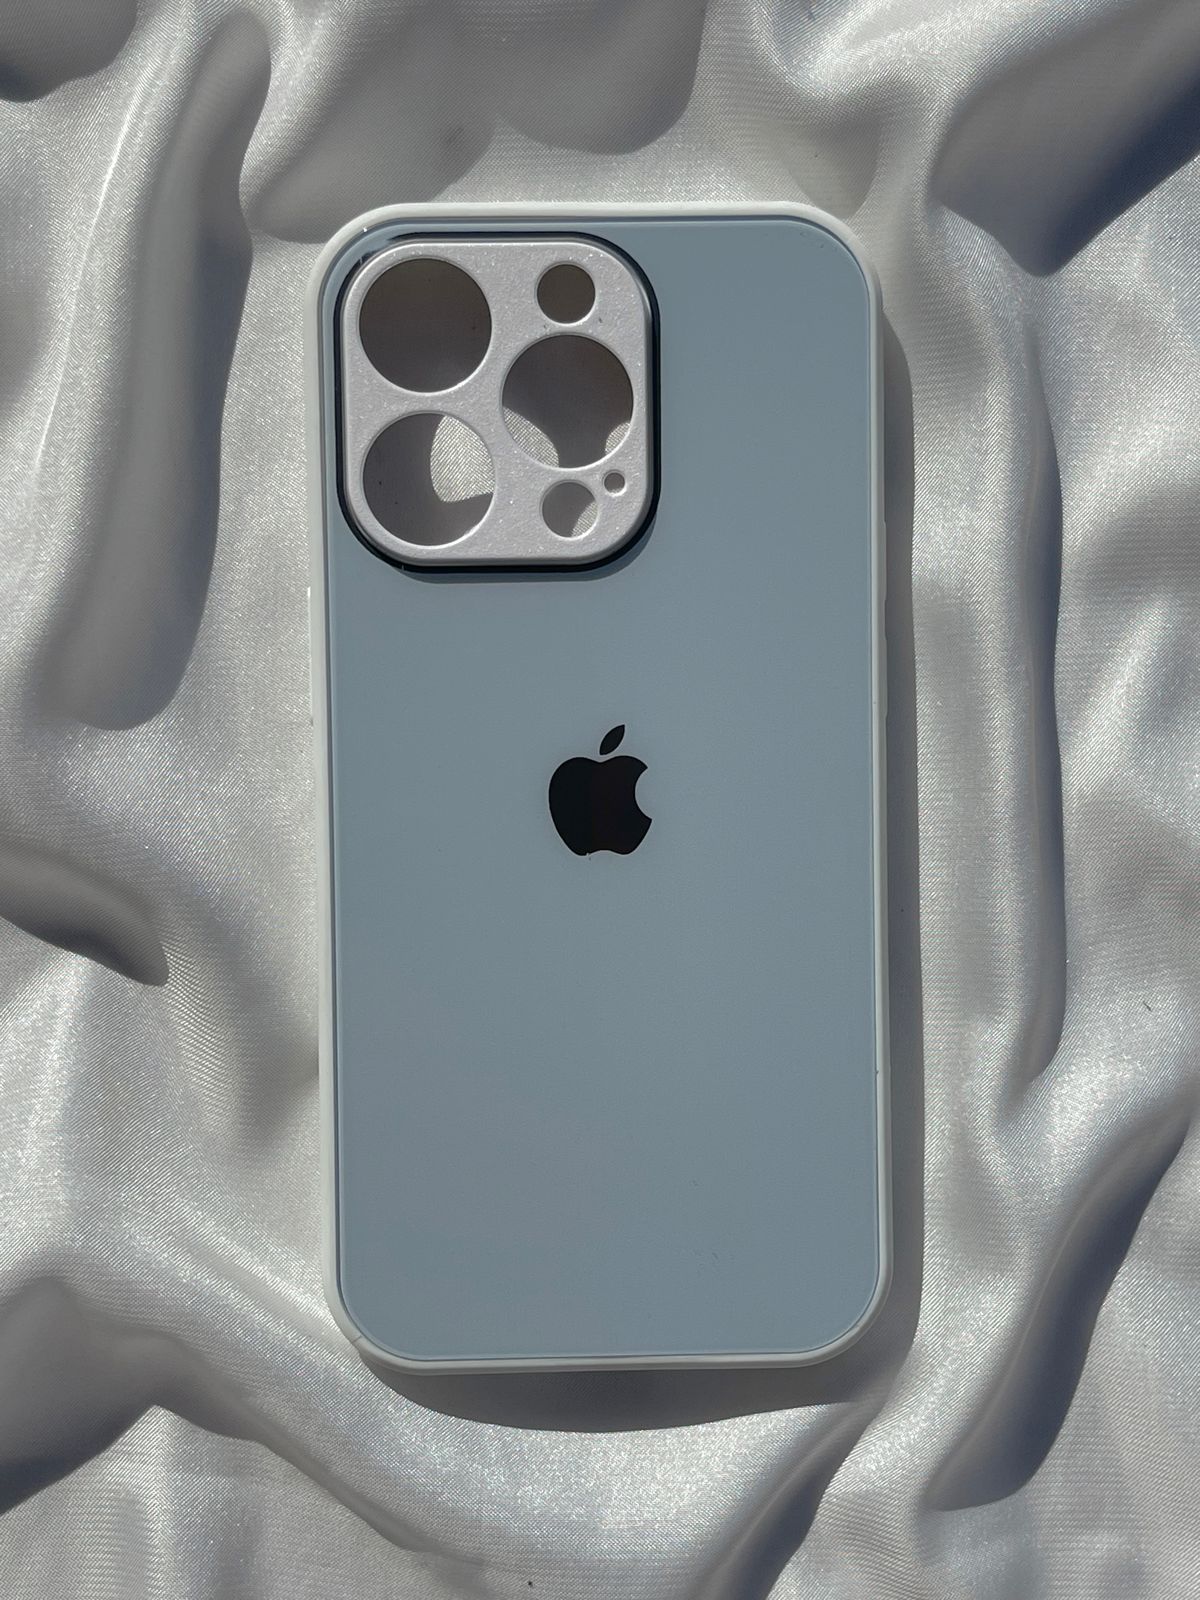 iPhone "14 Pro" Tempered Glass "Chrome" Case